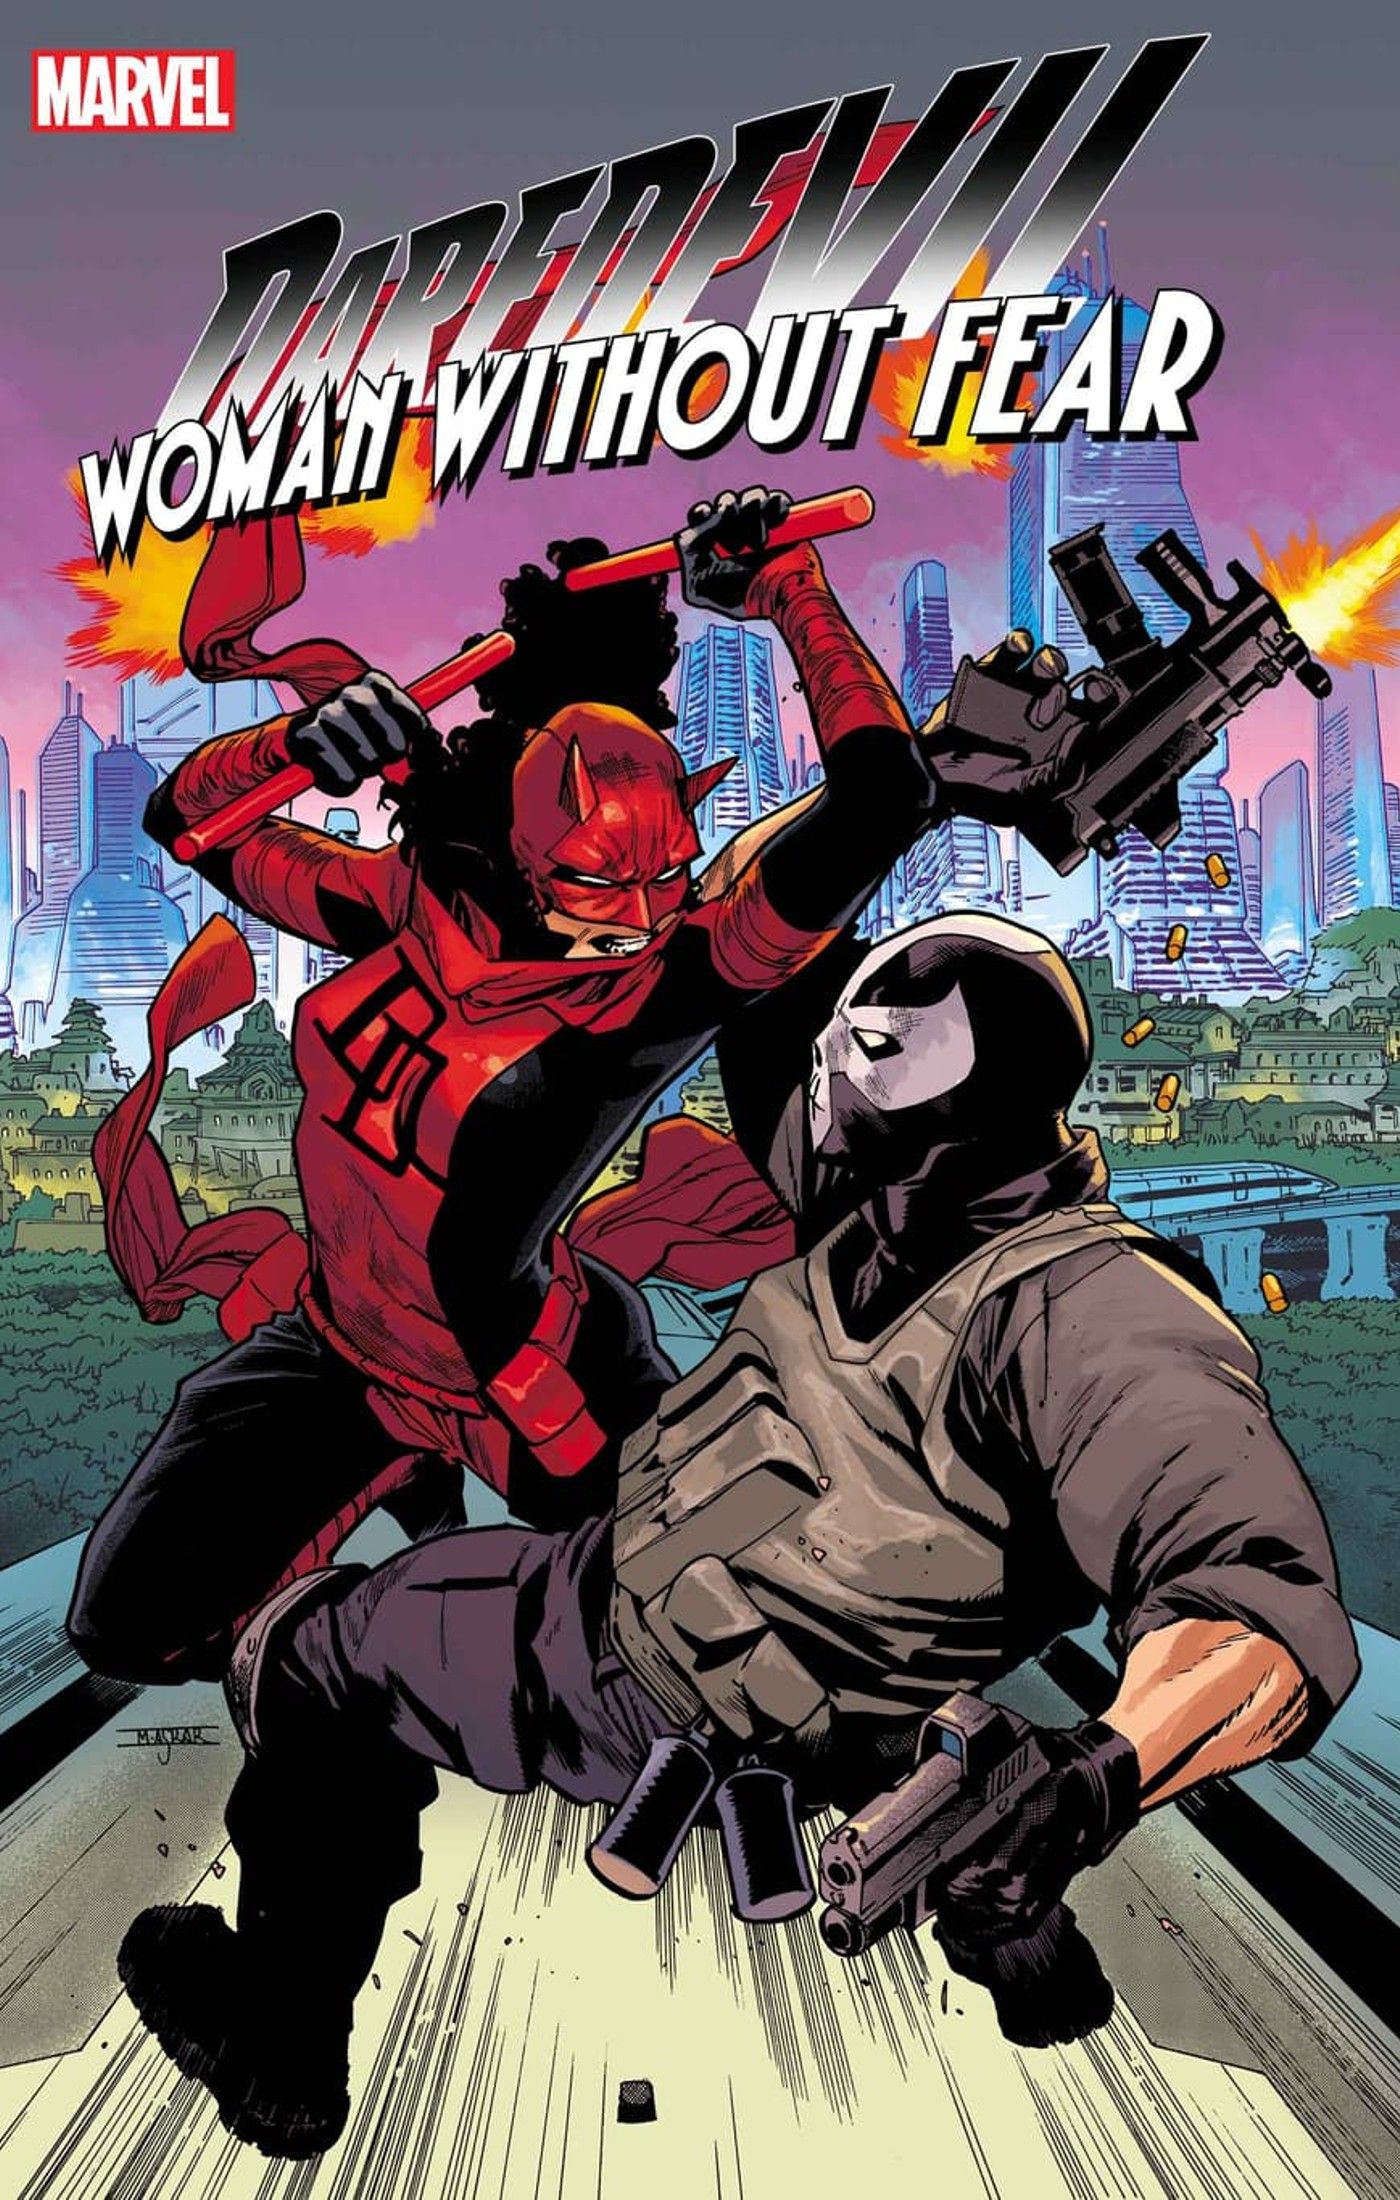 Elektra Takes On Punisher, Bullseye & More in All-New Daredevil: Woman Without Fear Series